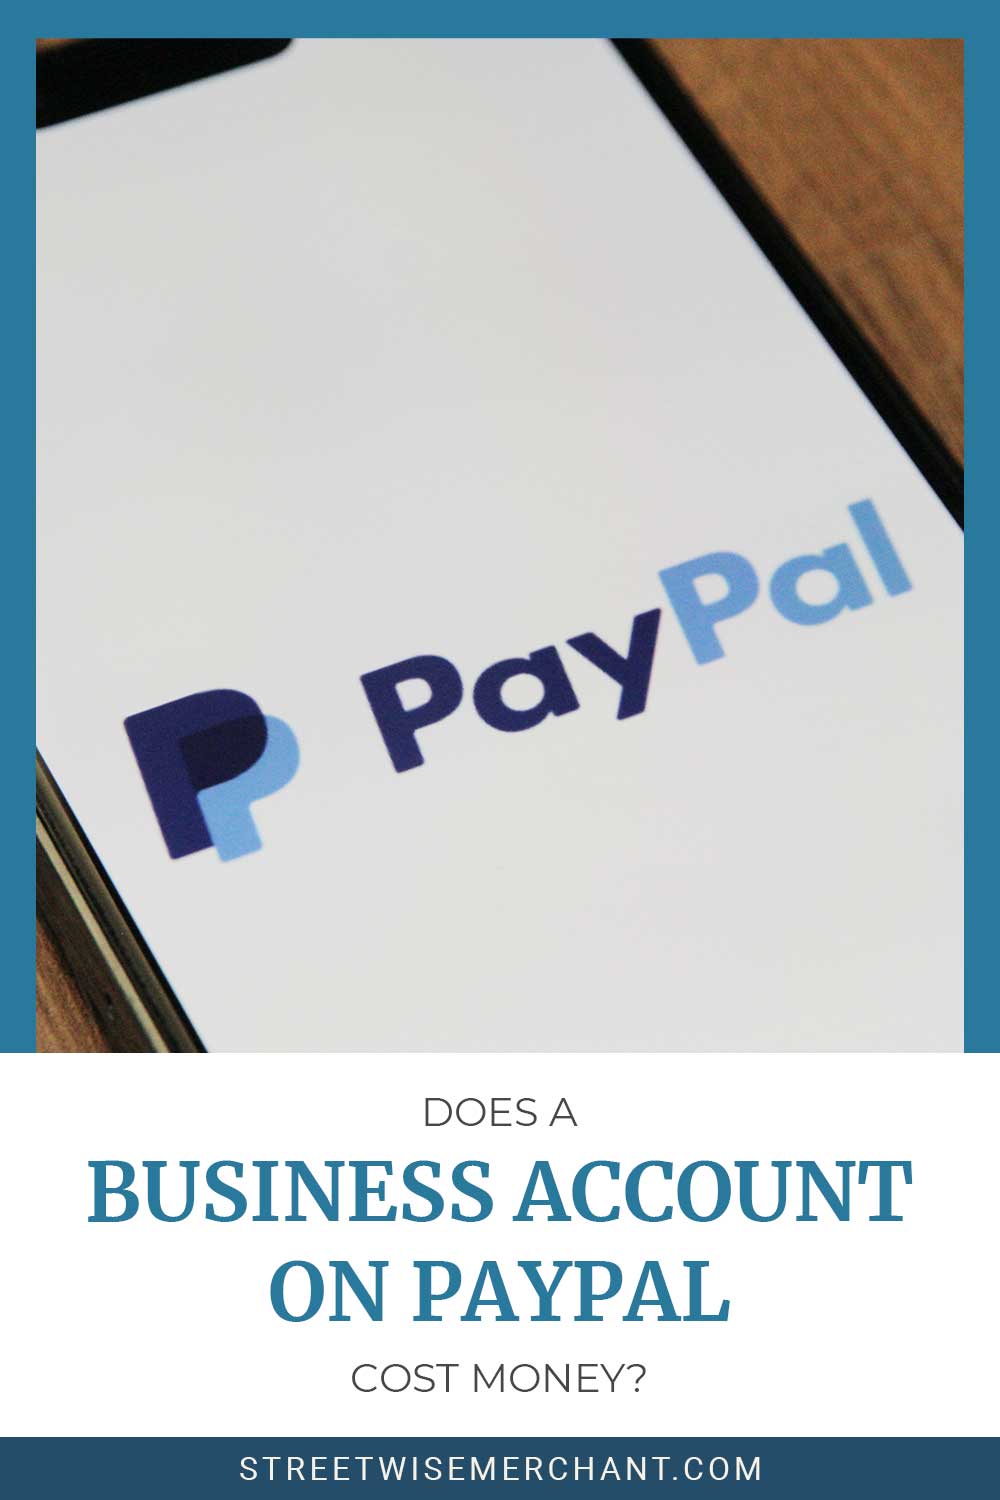 Does a Business Account on PayPal Cost Money?